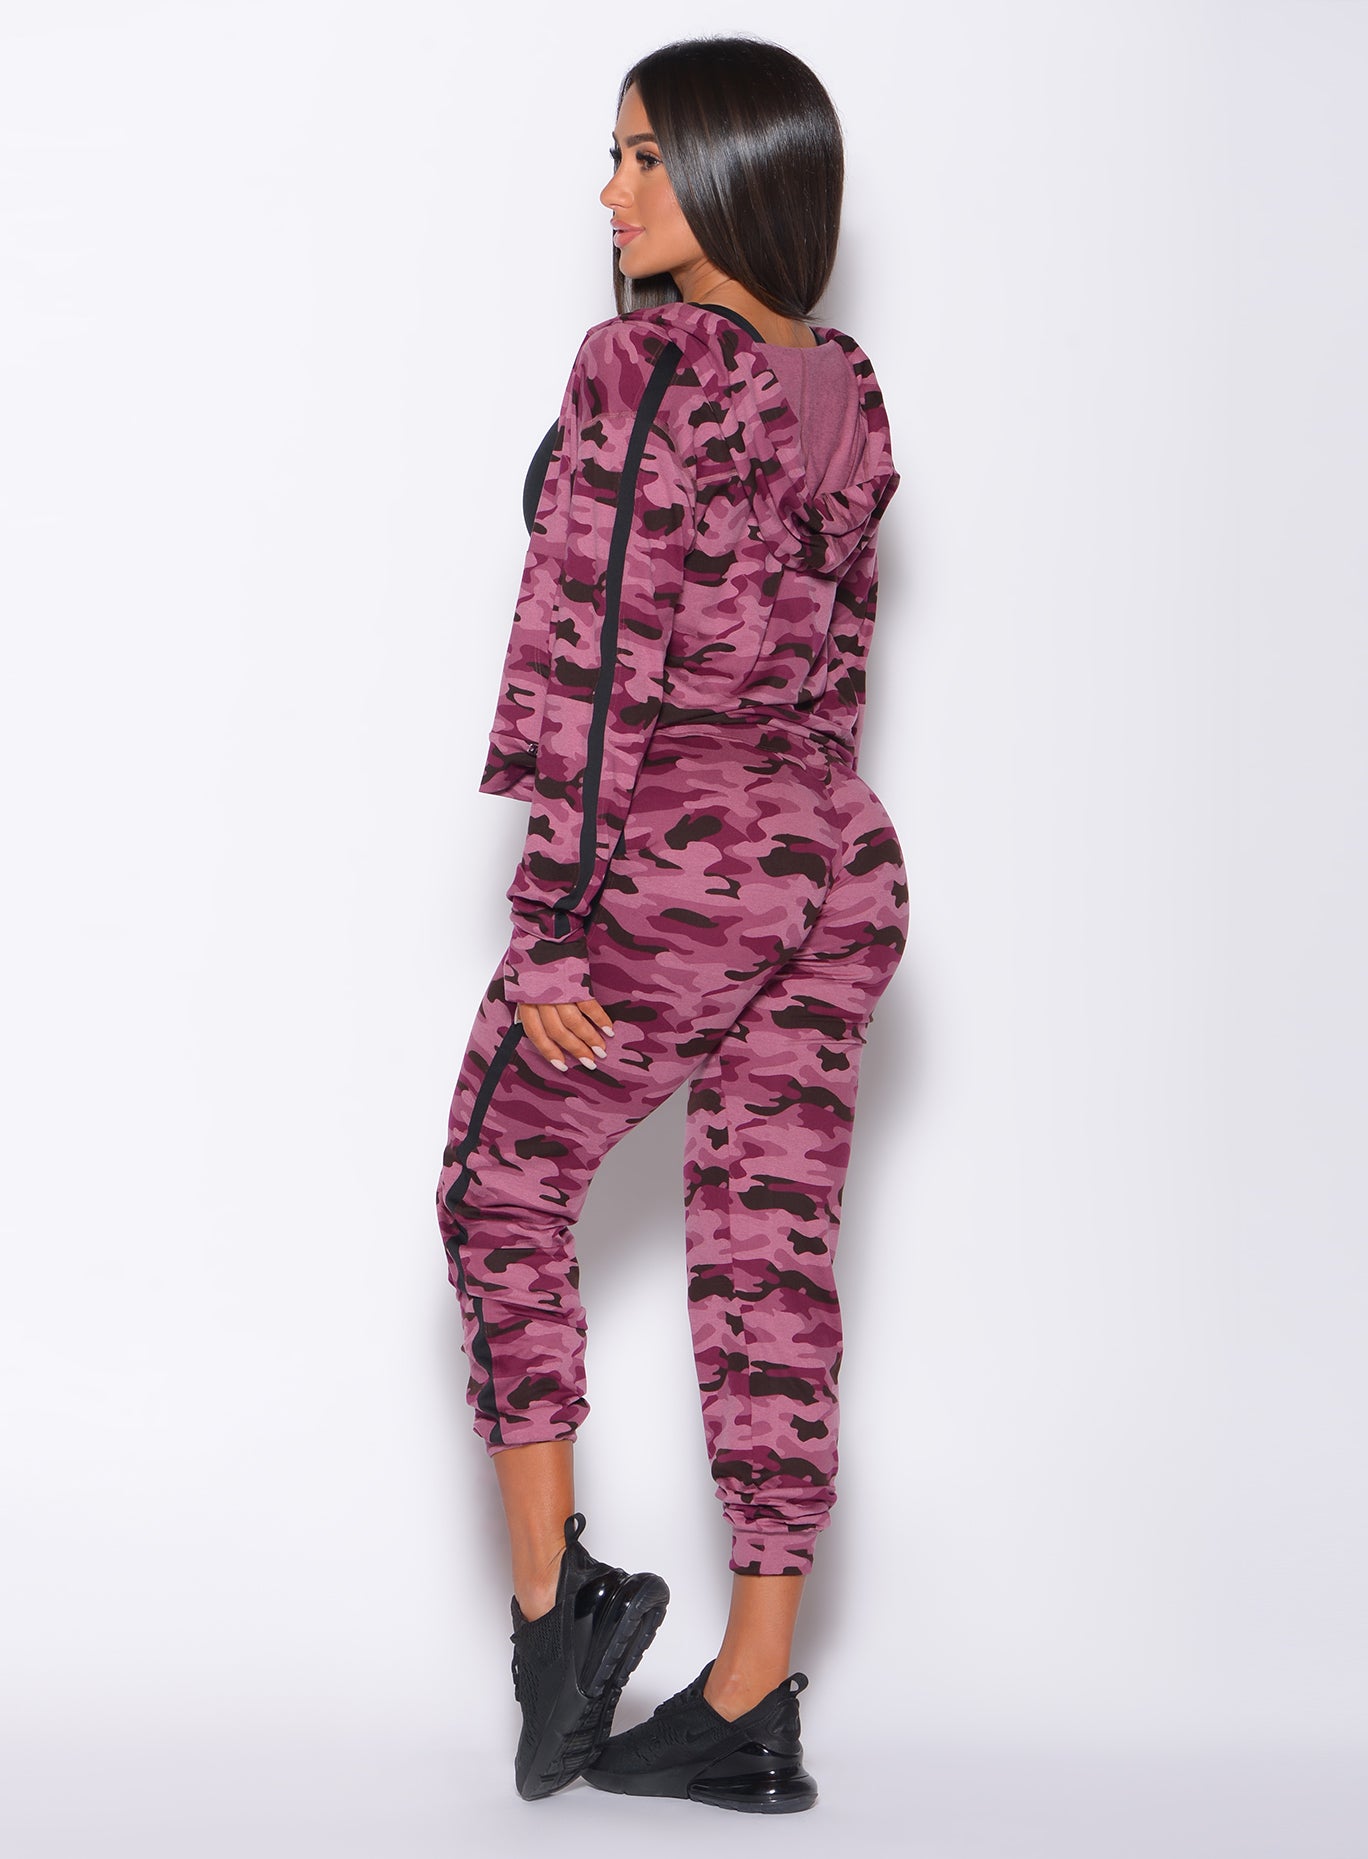 Left side  profile view of a model in our dream joggers in Purple Power Camo color and a matching long sleeved jacket